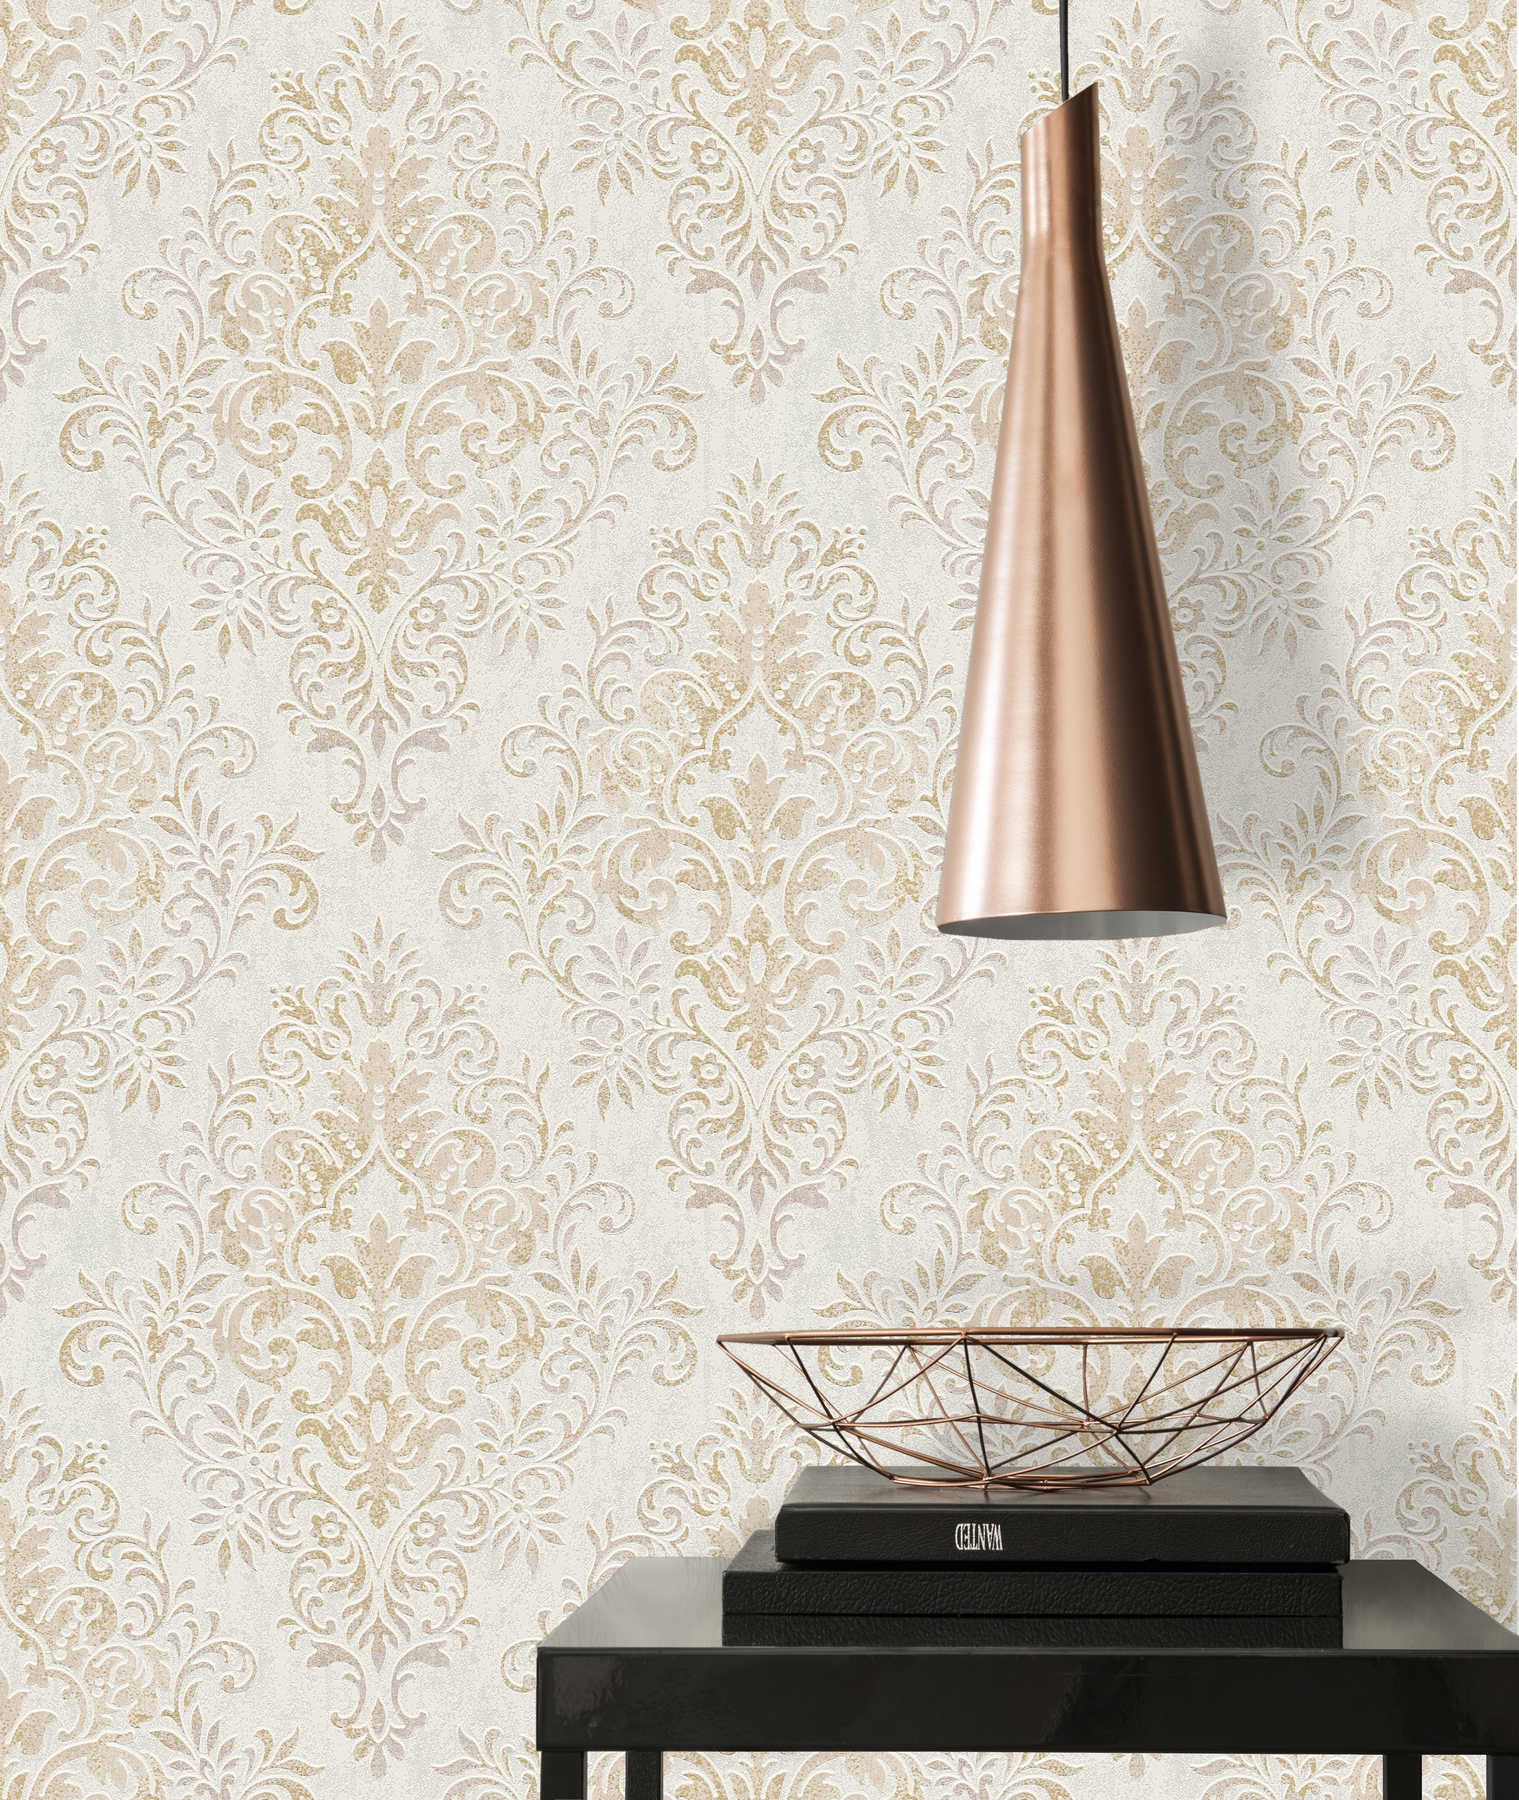             Non-woven wallpaper ornaments with gold accent & used look - beige, brown, metallic
        